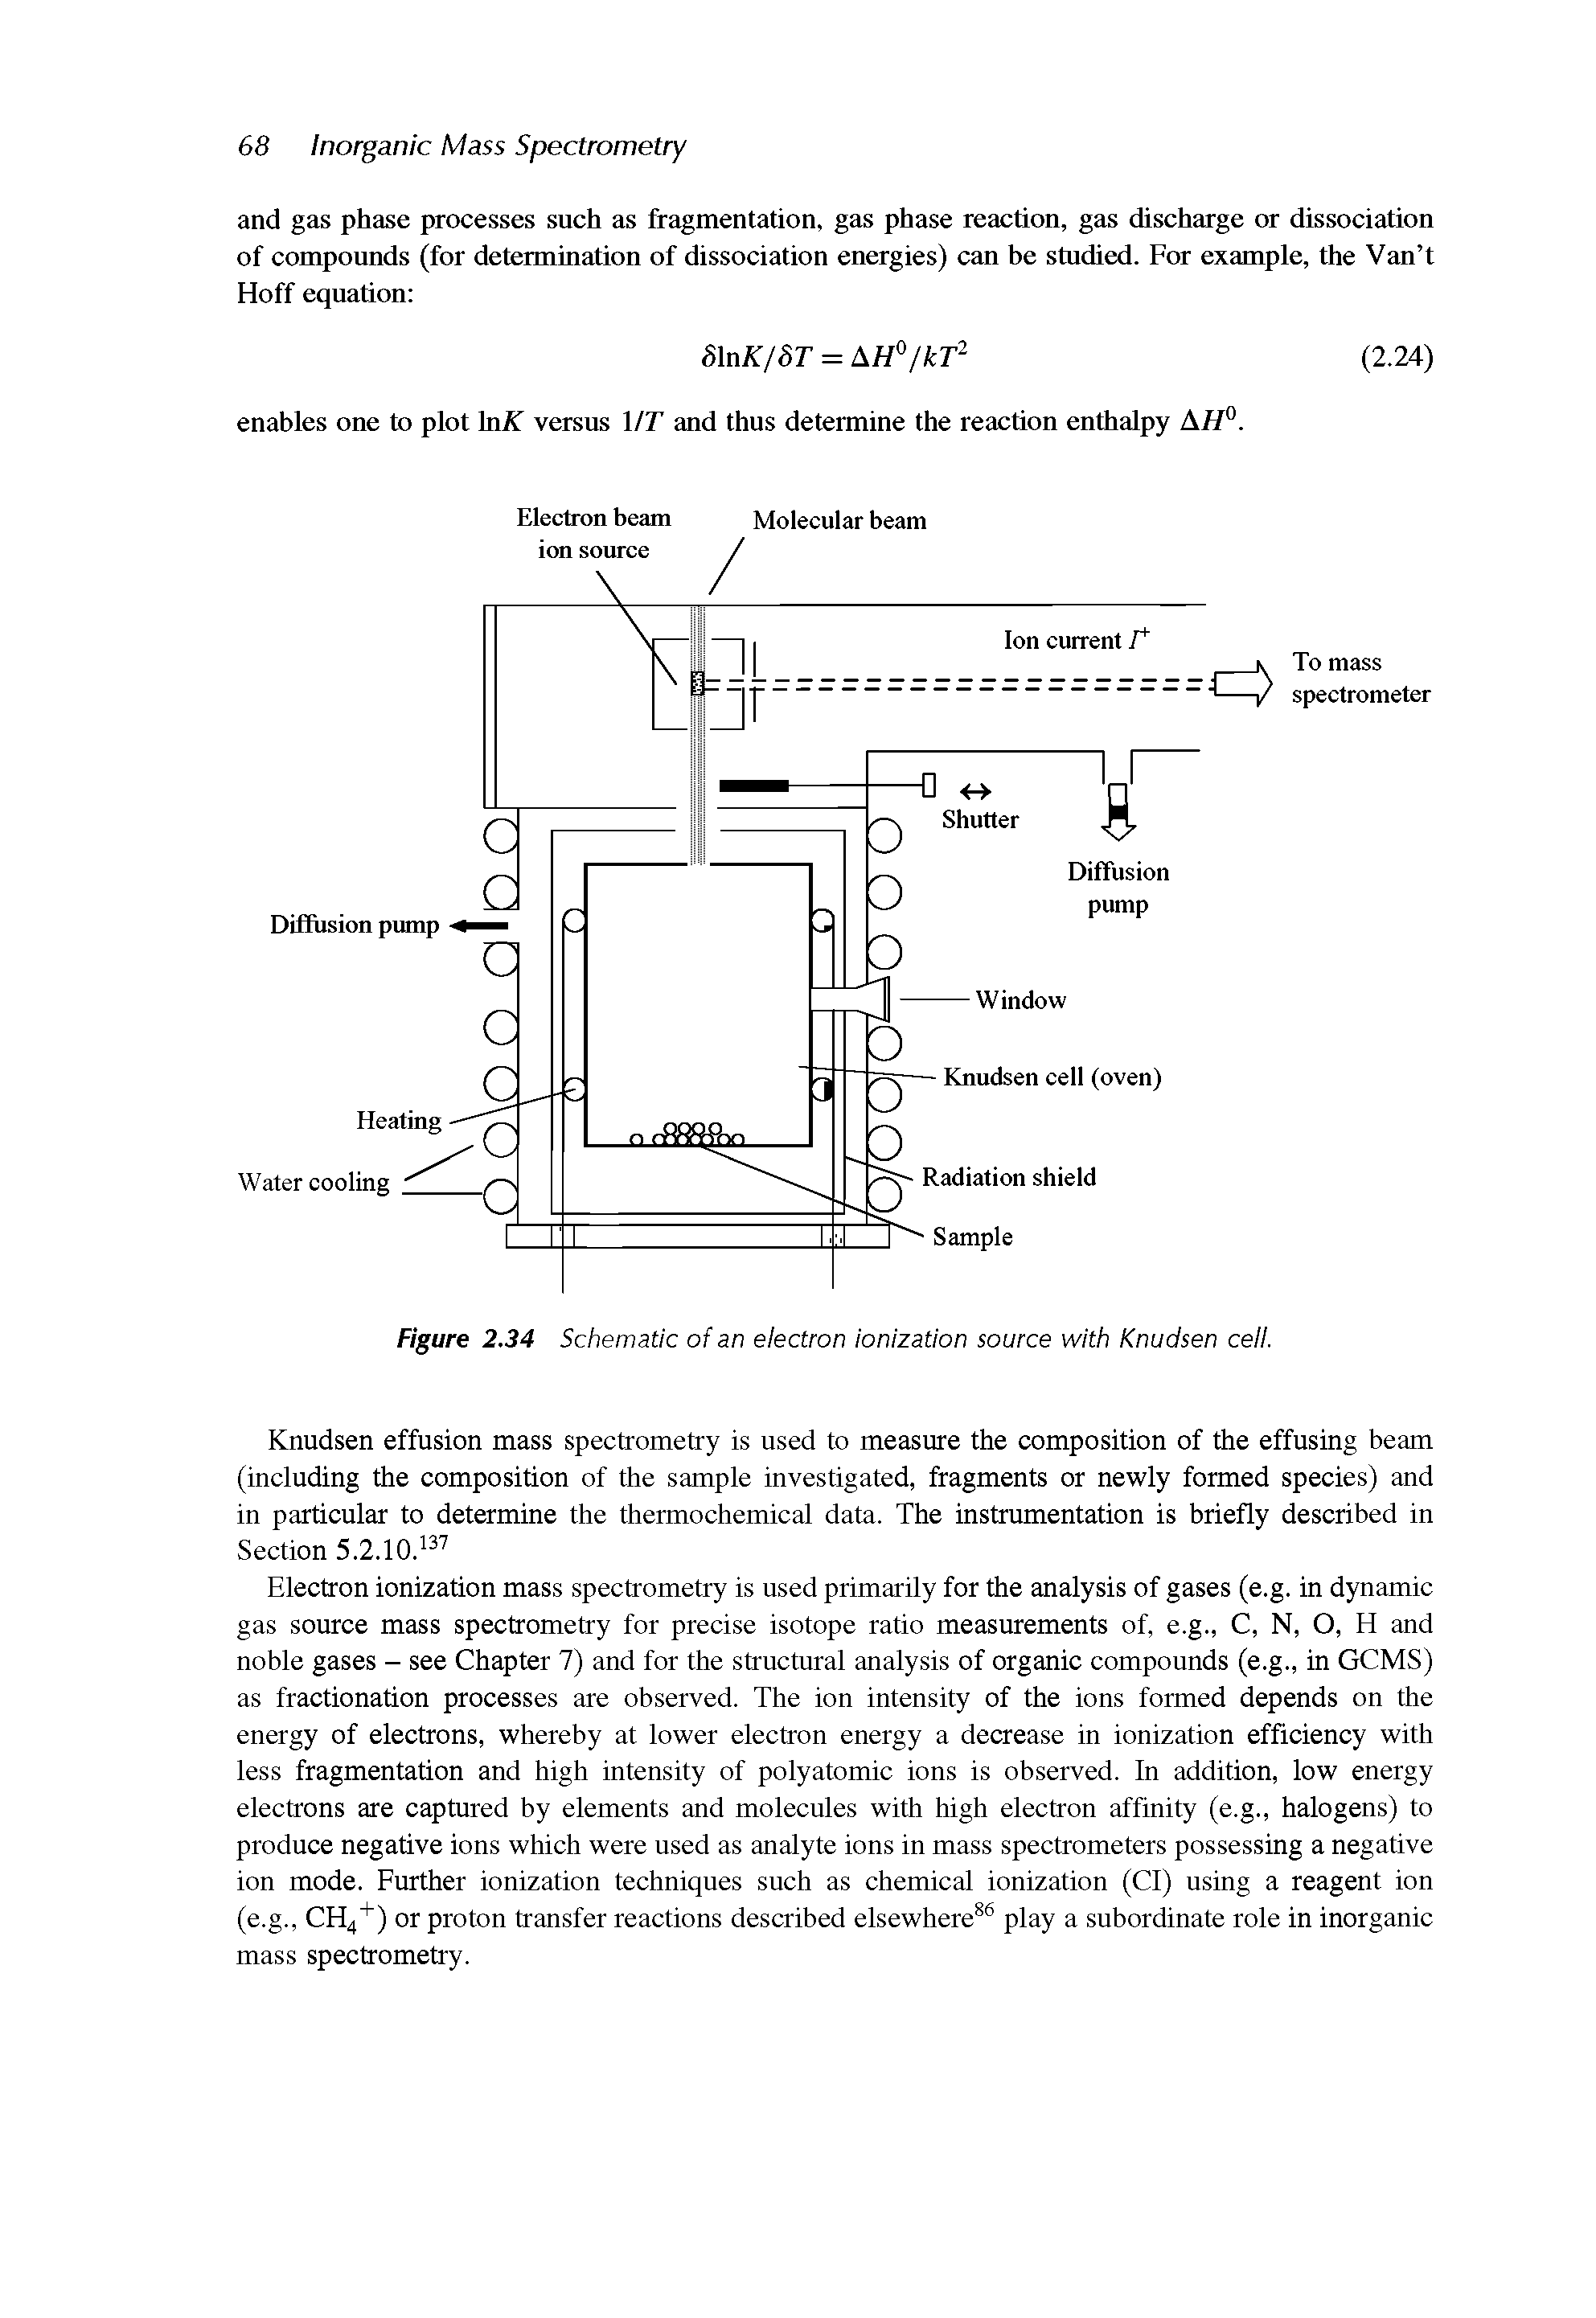 Figure 2.34 Schematic of an electron ionization source with Knudsen cell.